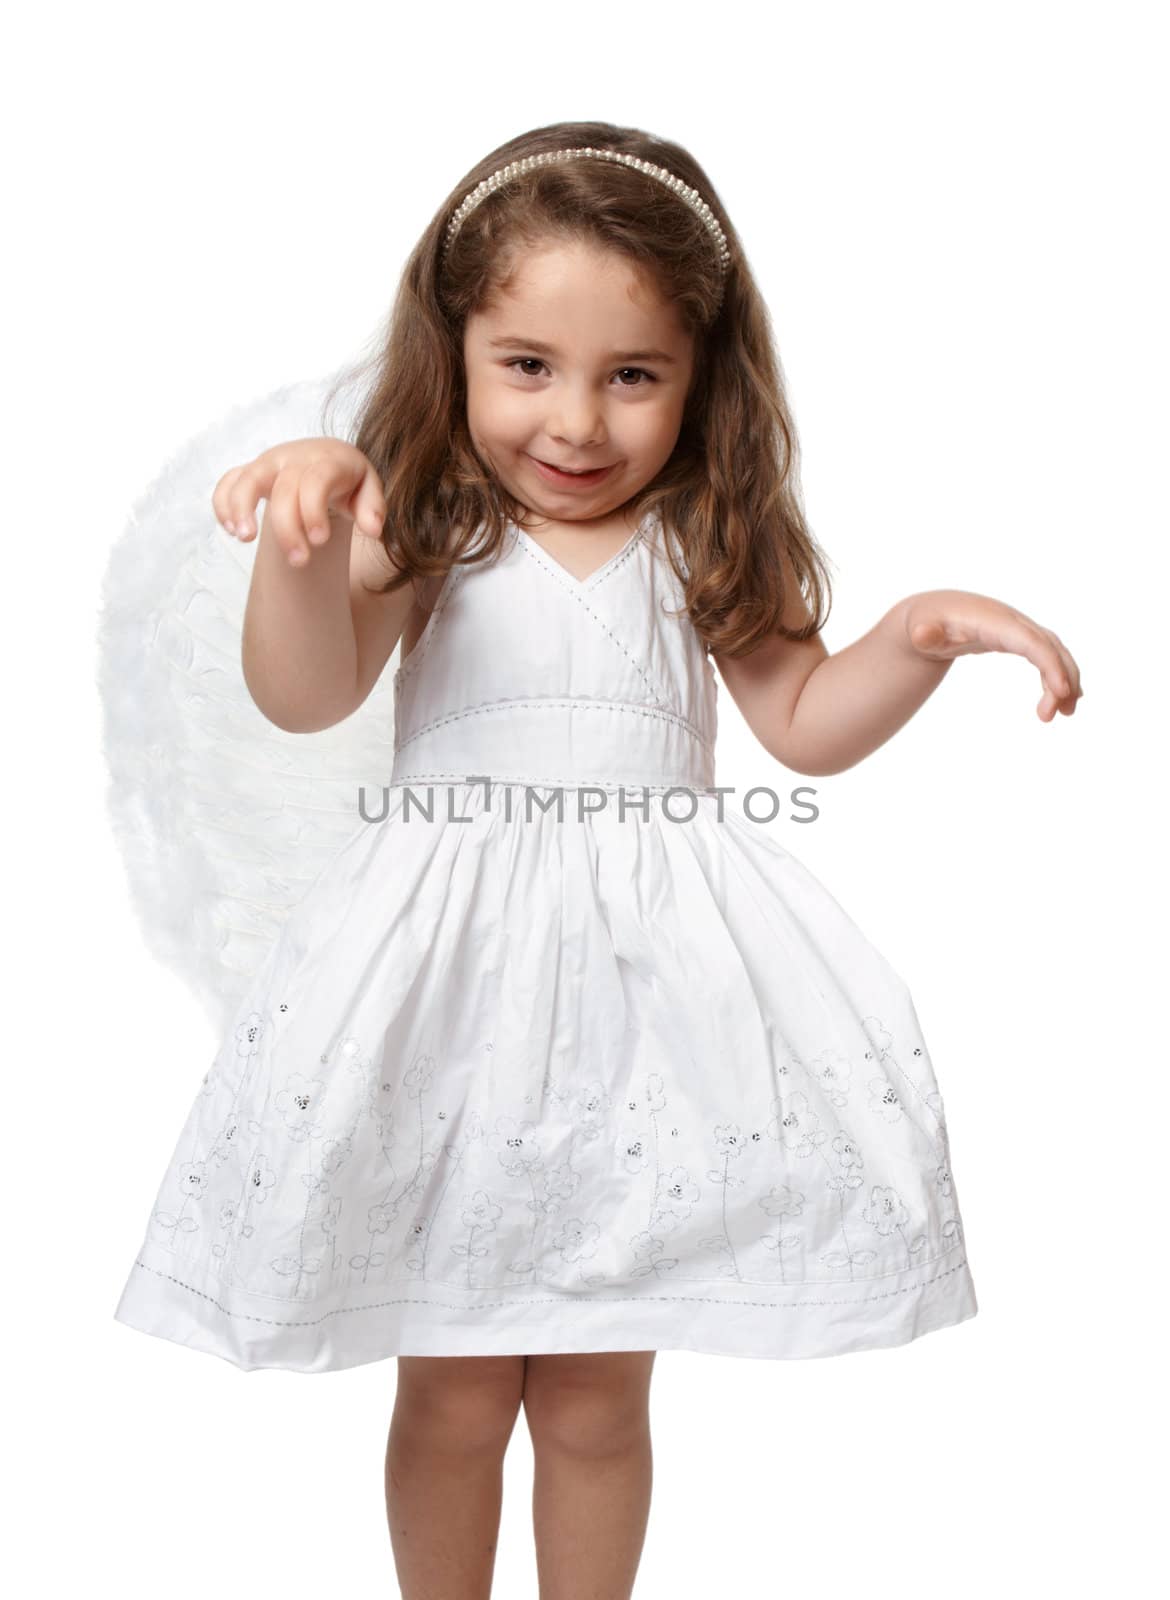 Angelic young preschool child in a pretty white dress with flower embroidery and she is wearing feather fairy angel wings